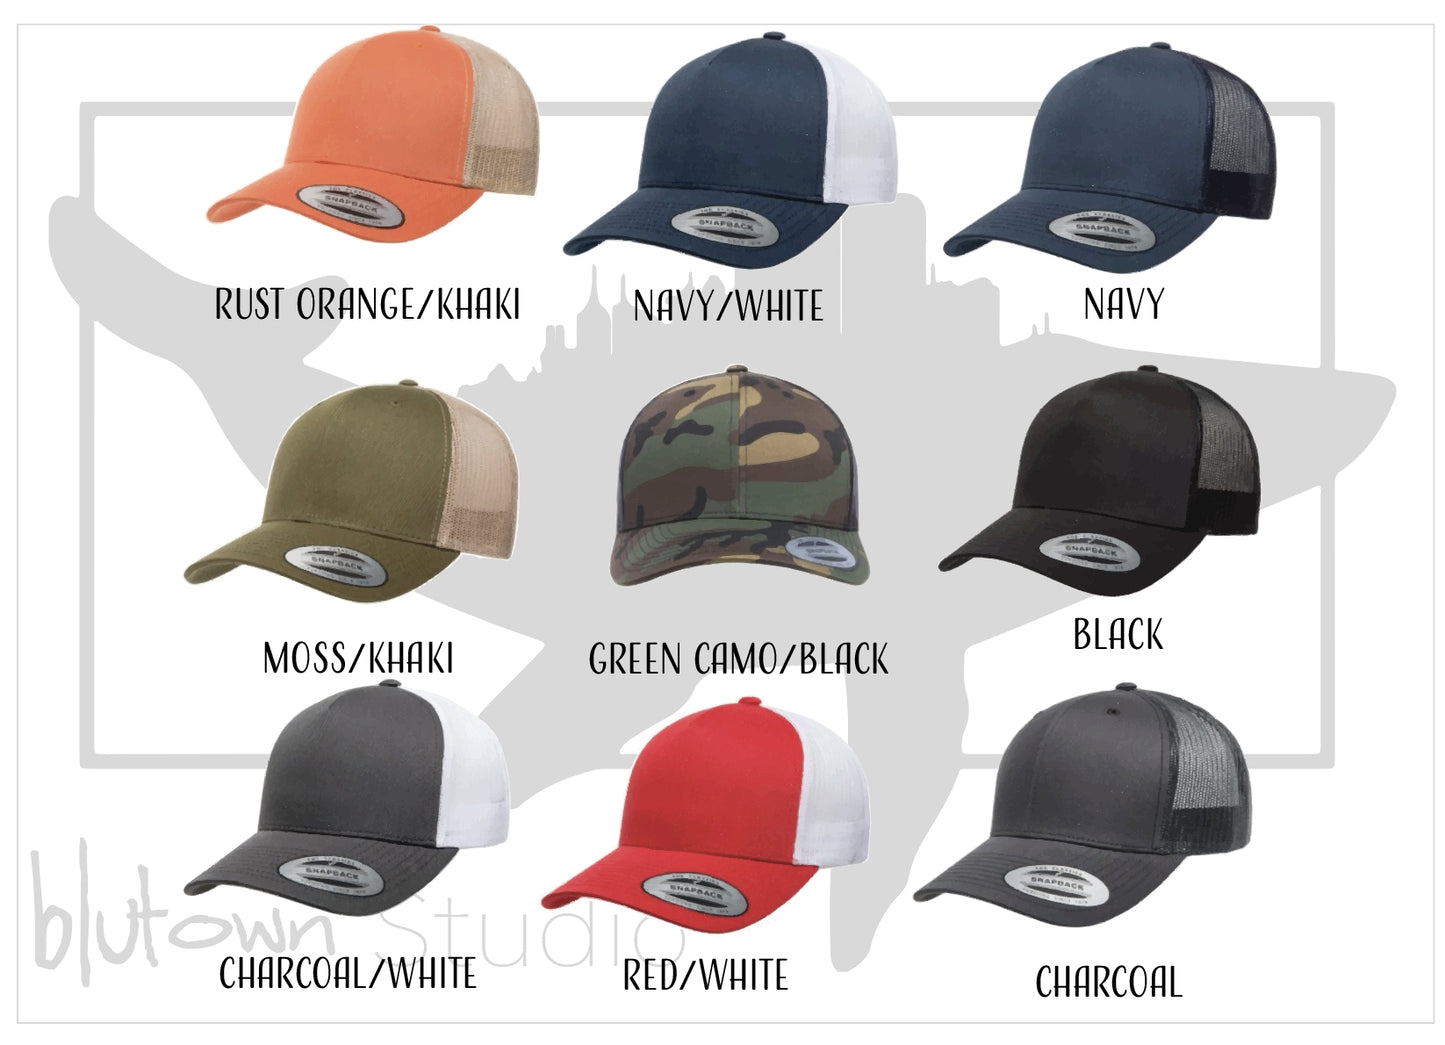 Army Logo Hat |  US Military Trucker Hat | Army Hat